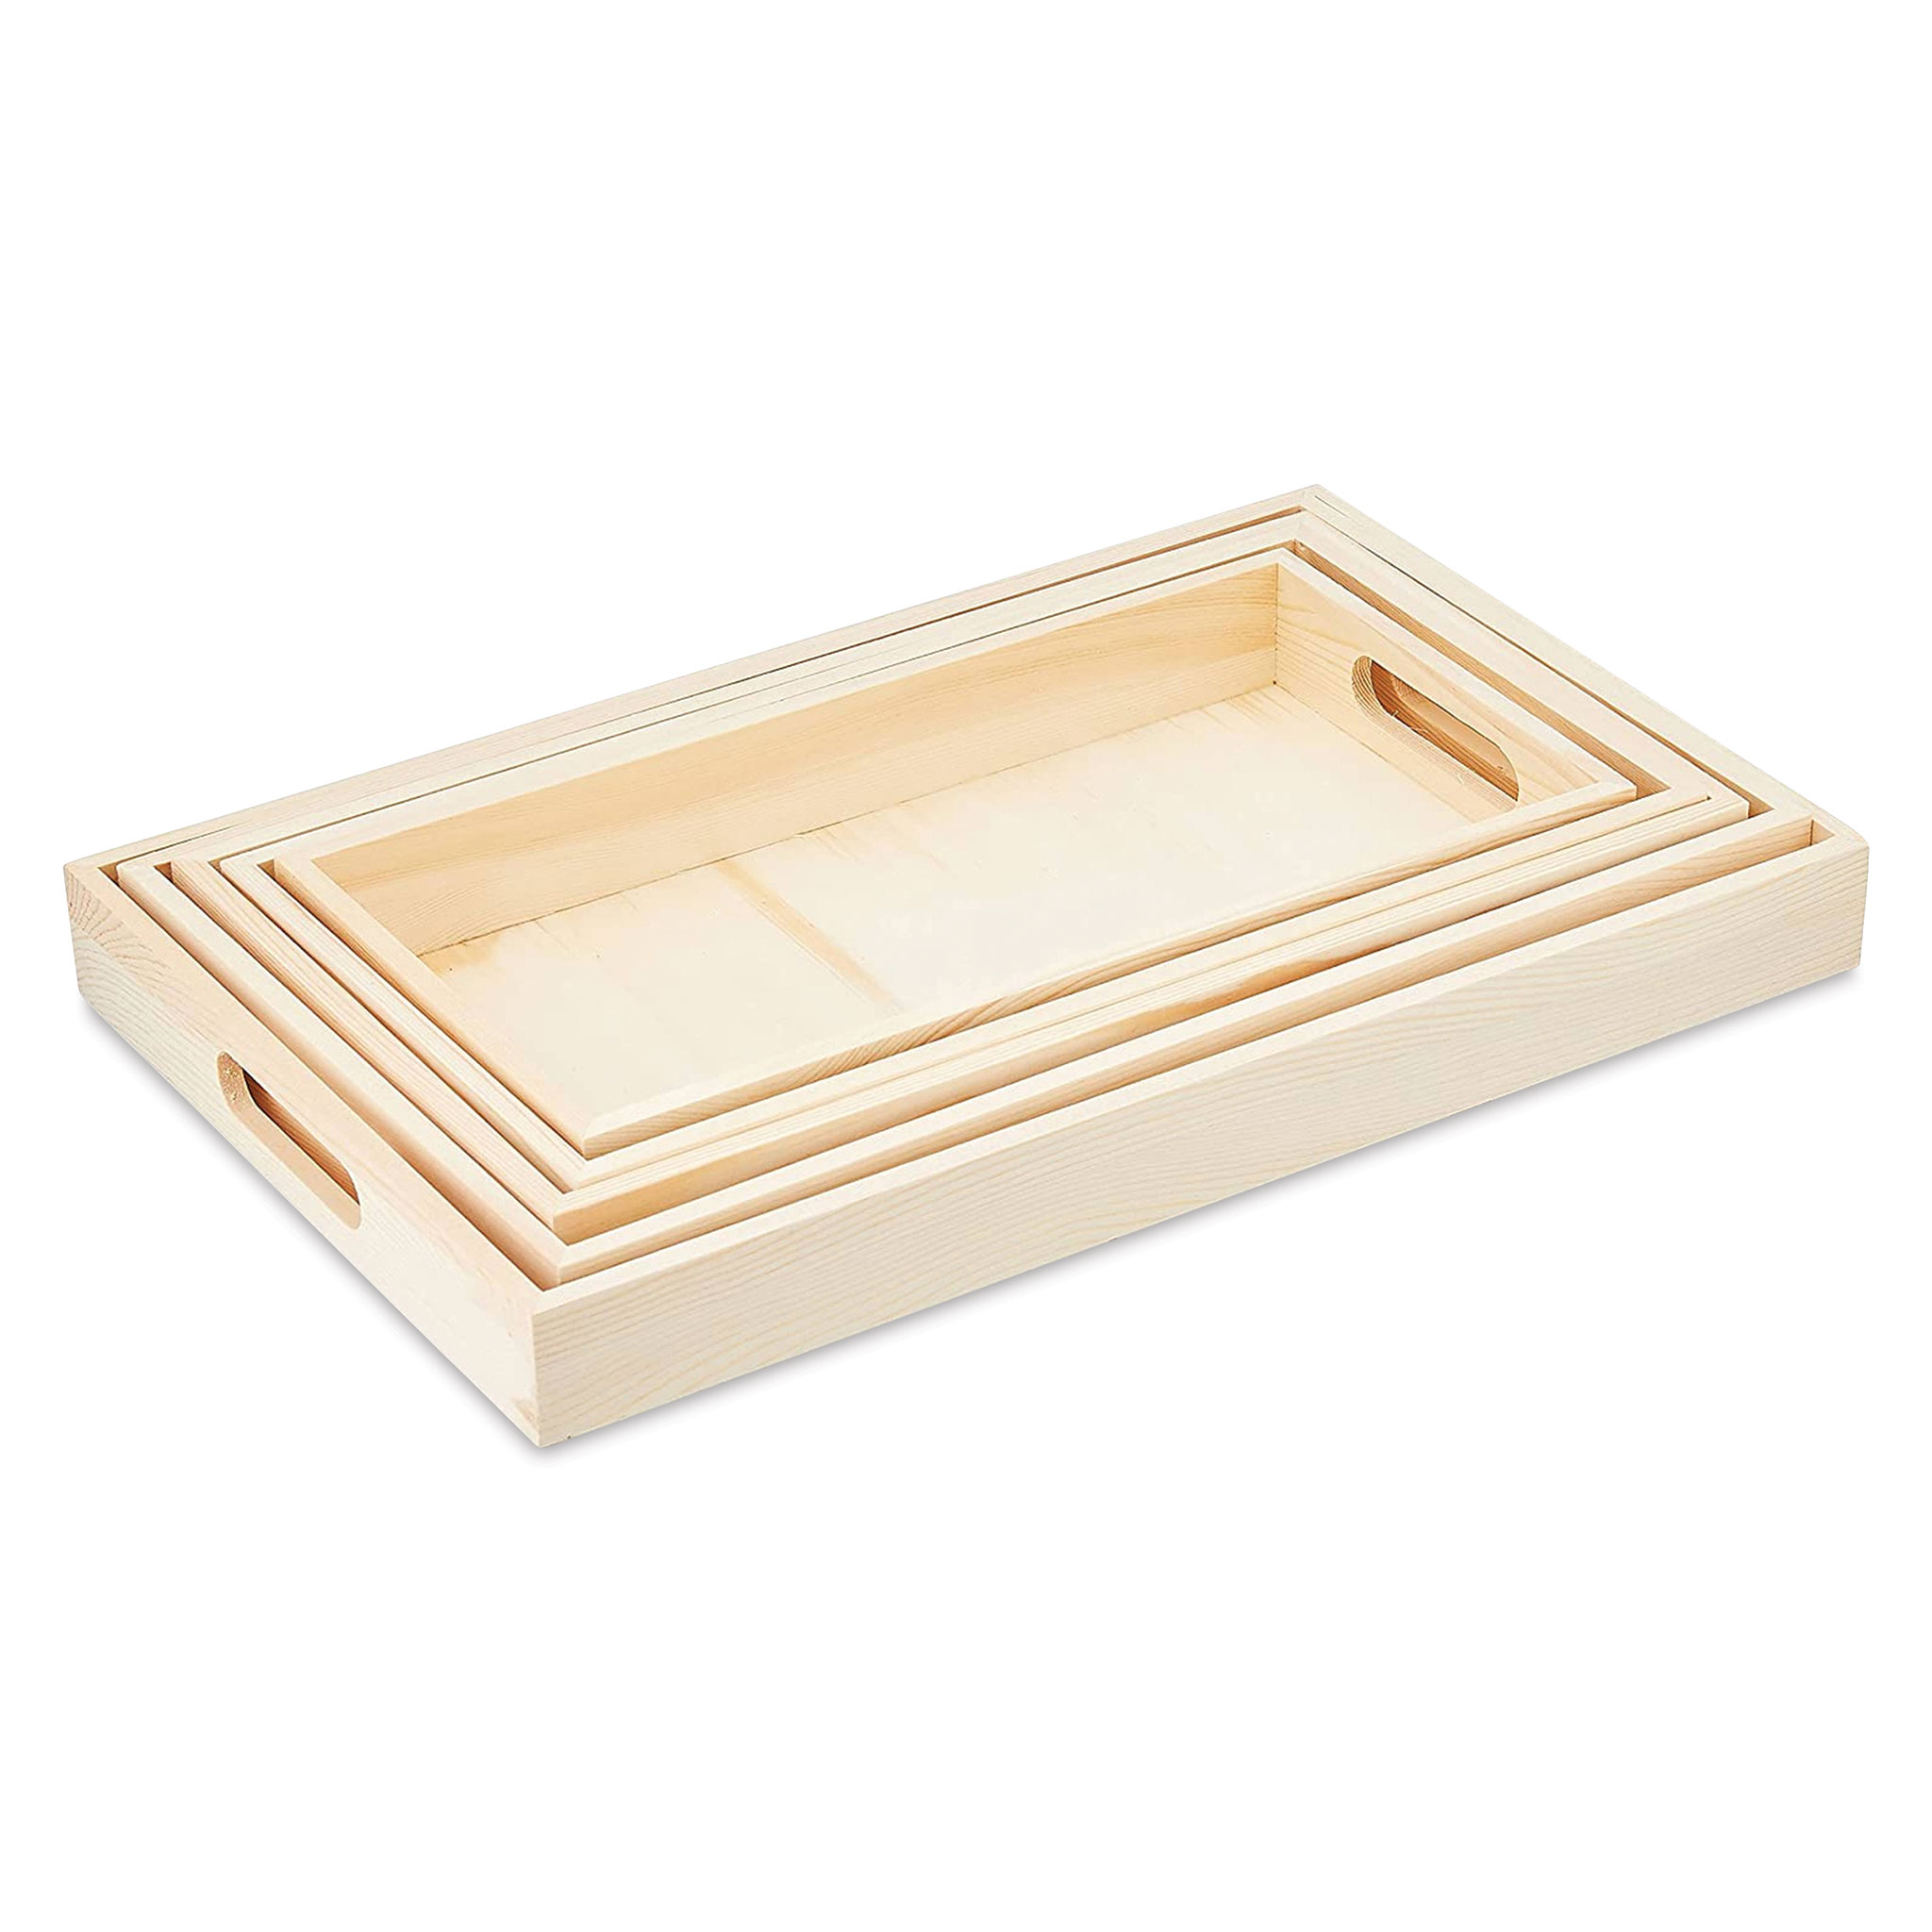 Multicraft Imports Paintable Wooden Trays w/Handles 5 Piece Set